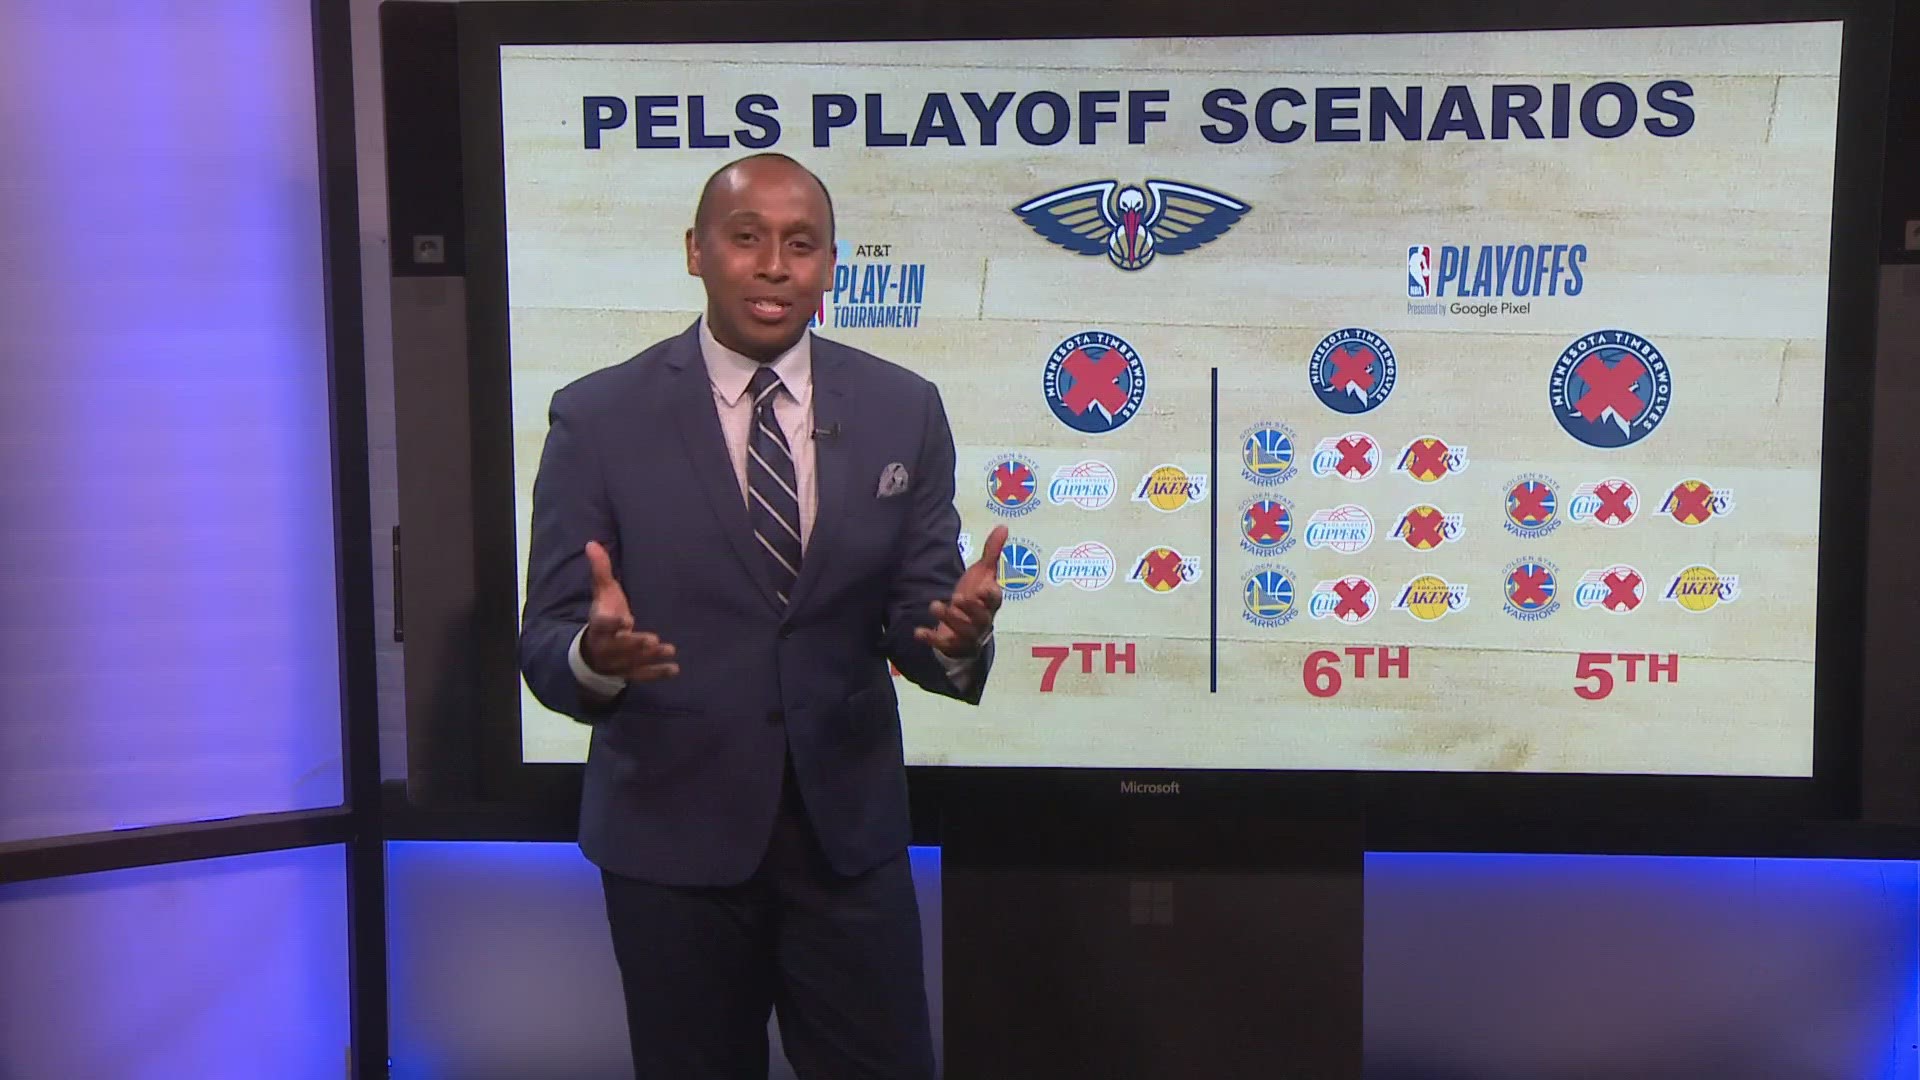 The Pelicans could find themselves landing anywhere from the 5th seed to the 9th seed.